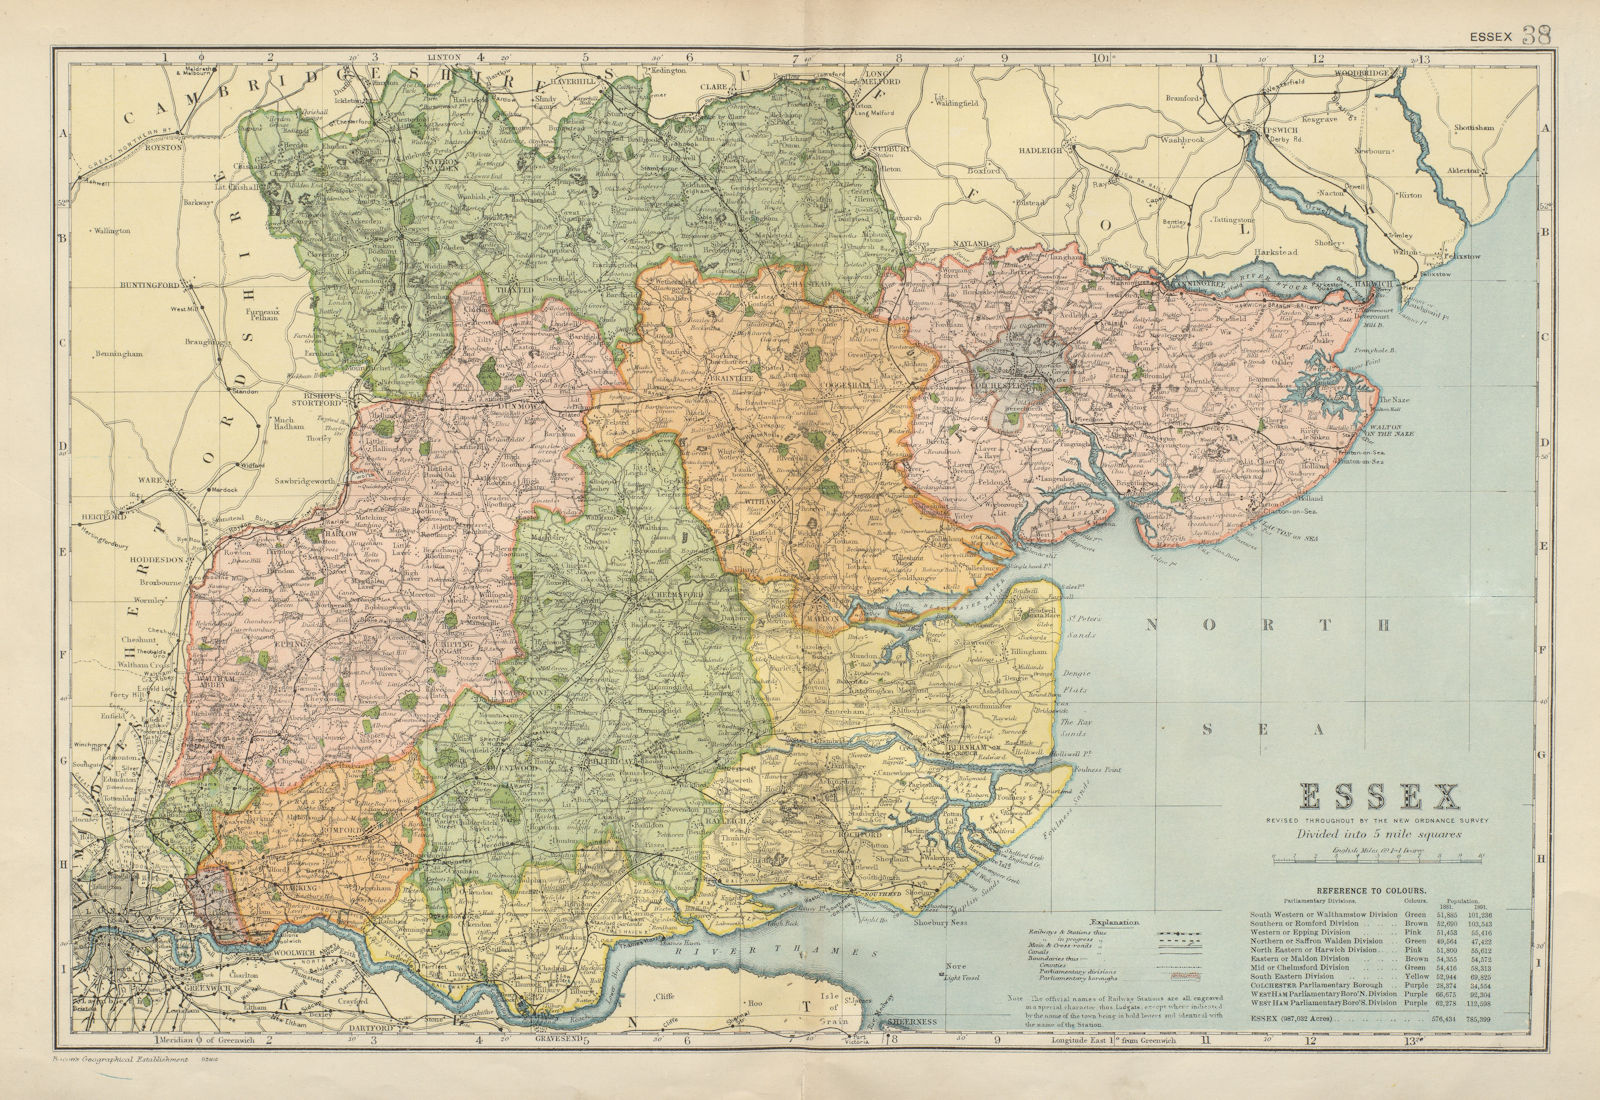 Associate Product ESSEX. County map. Parliamentary constituencies divisions. Railways. BACON 1900